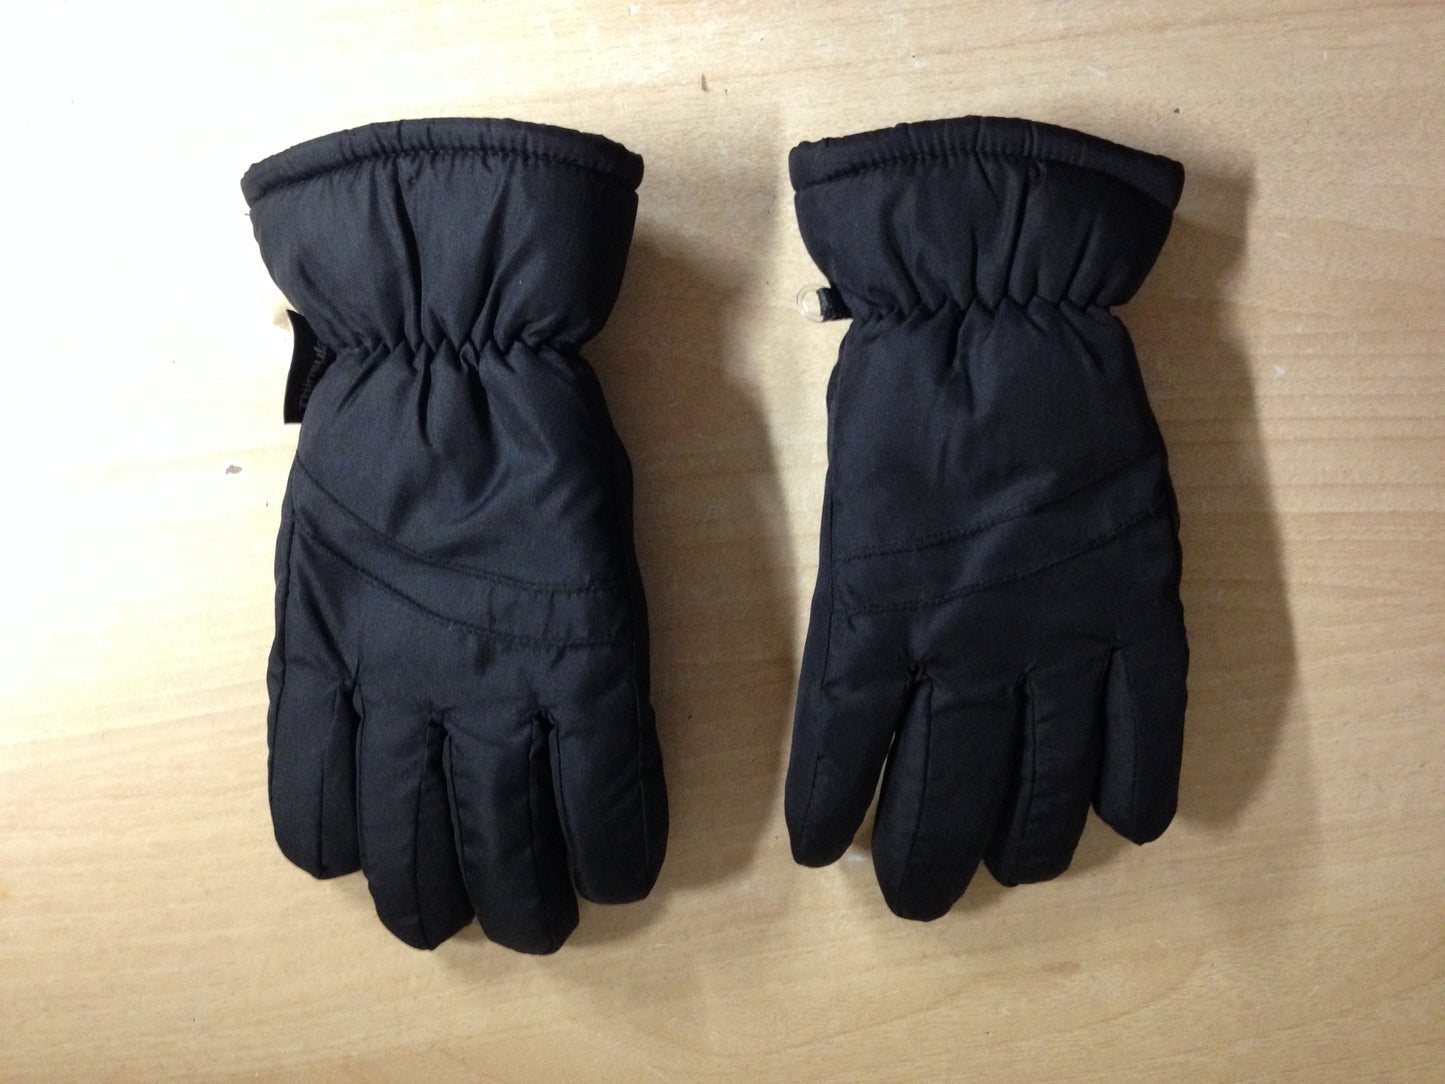 Winter Gloves and Mitts Child Size 8-12 Bold Black